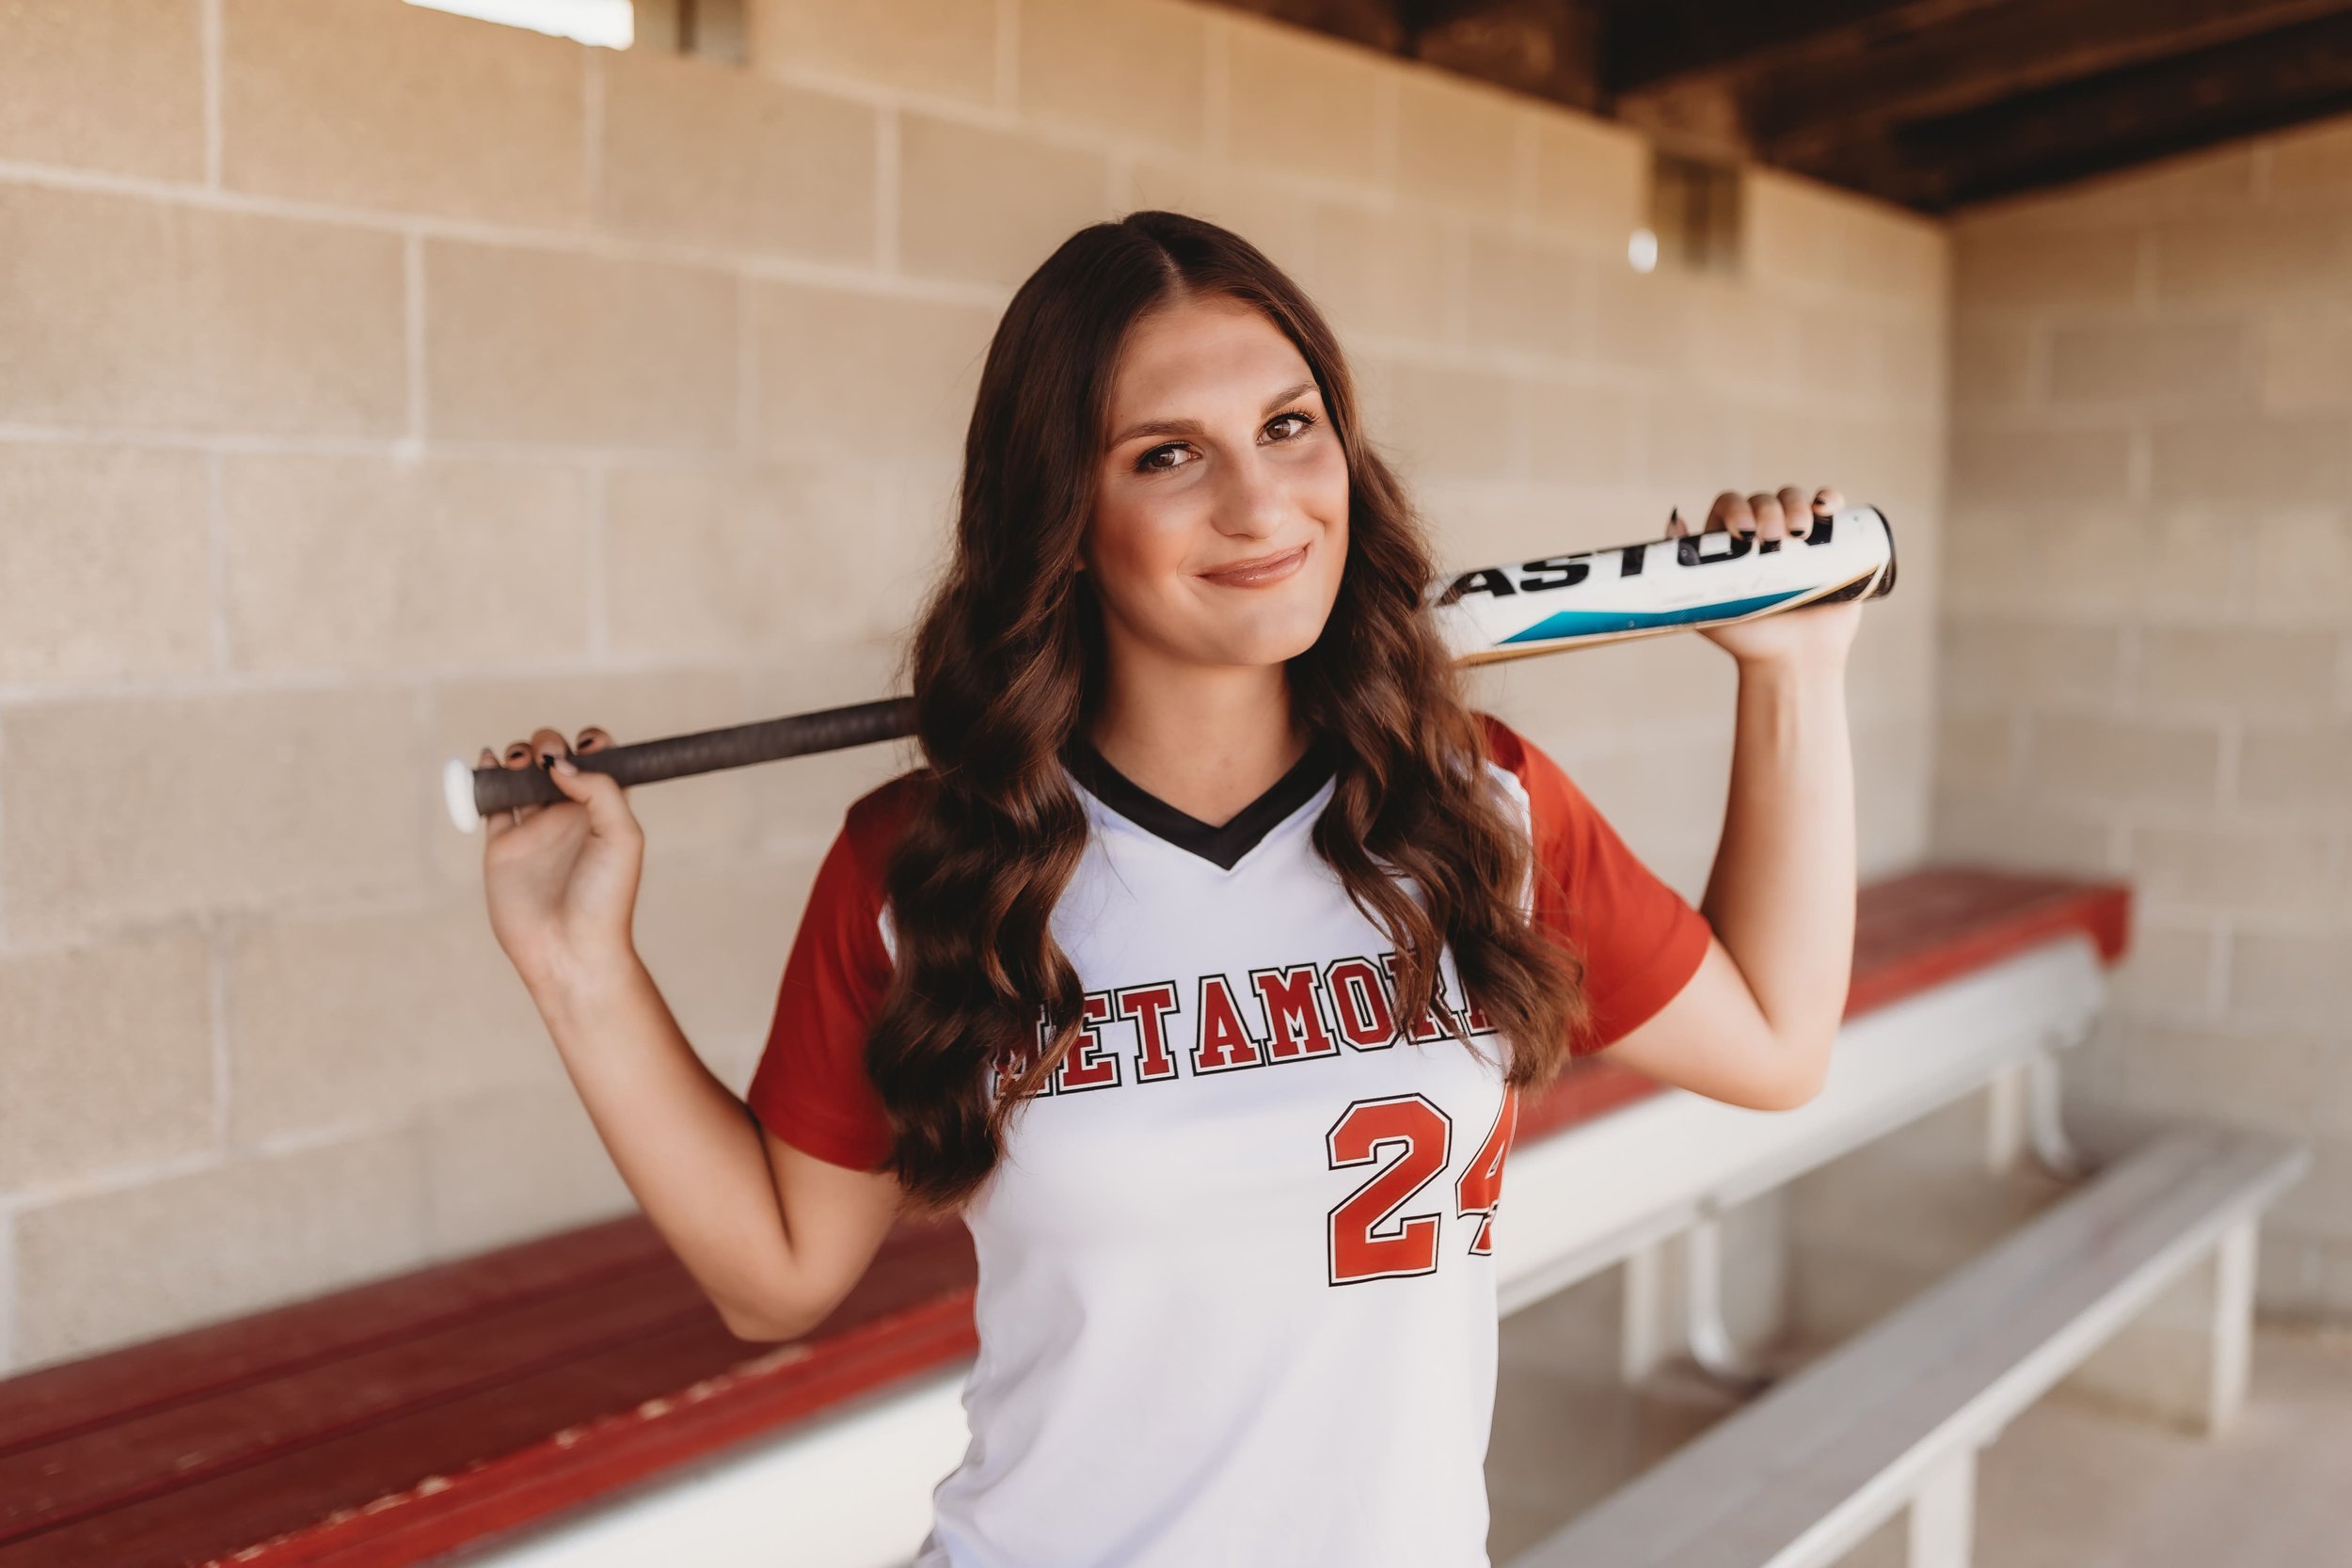  Metamora illinois senior smiles as she wears her softball uniform and over her shoulders is her bat for softball senior picture ideas 